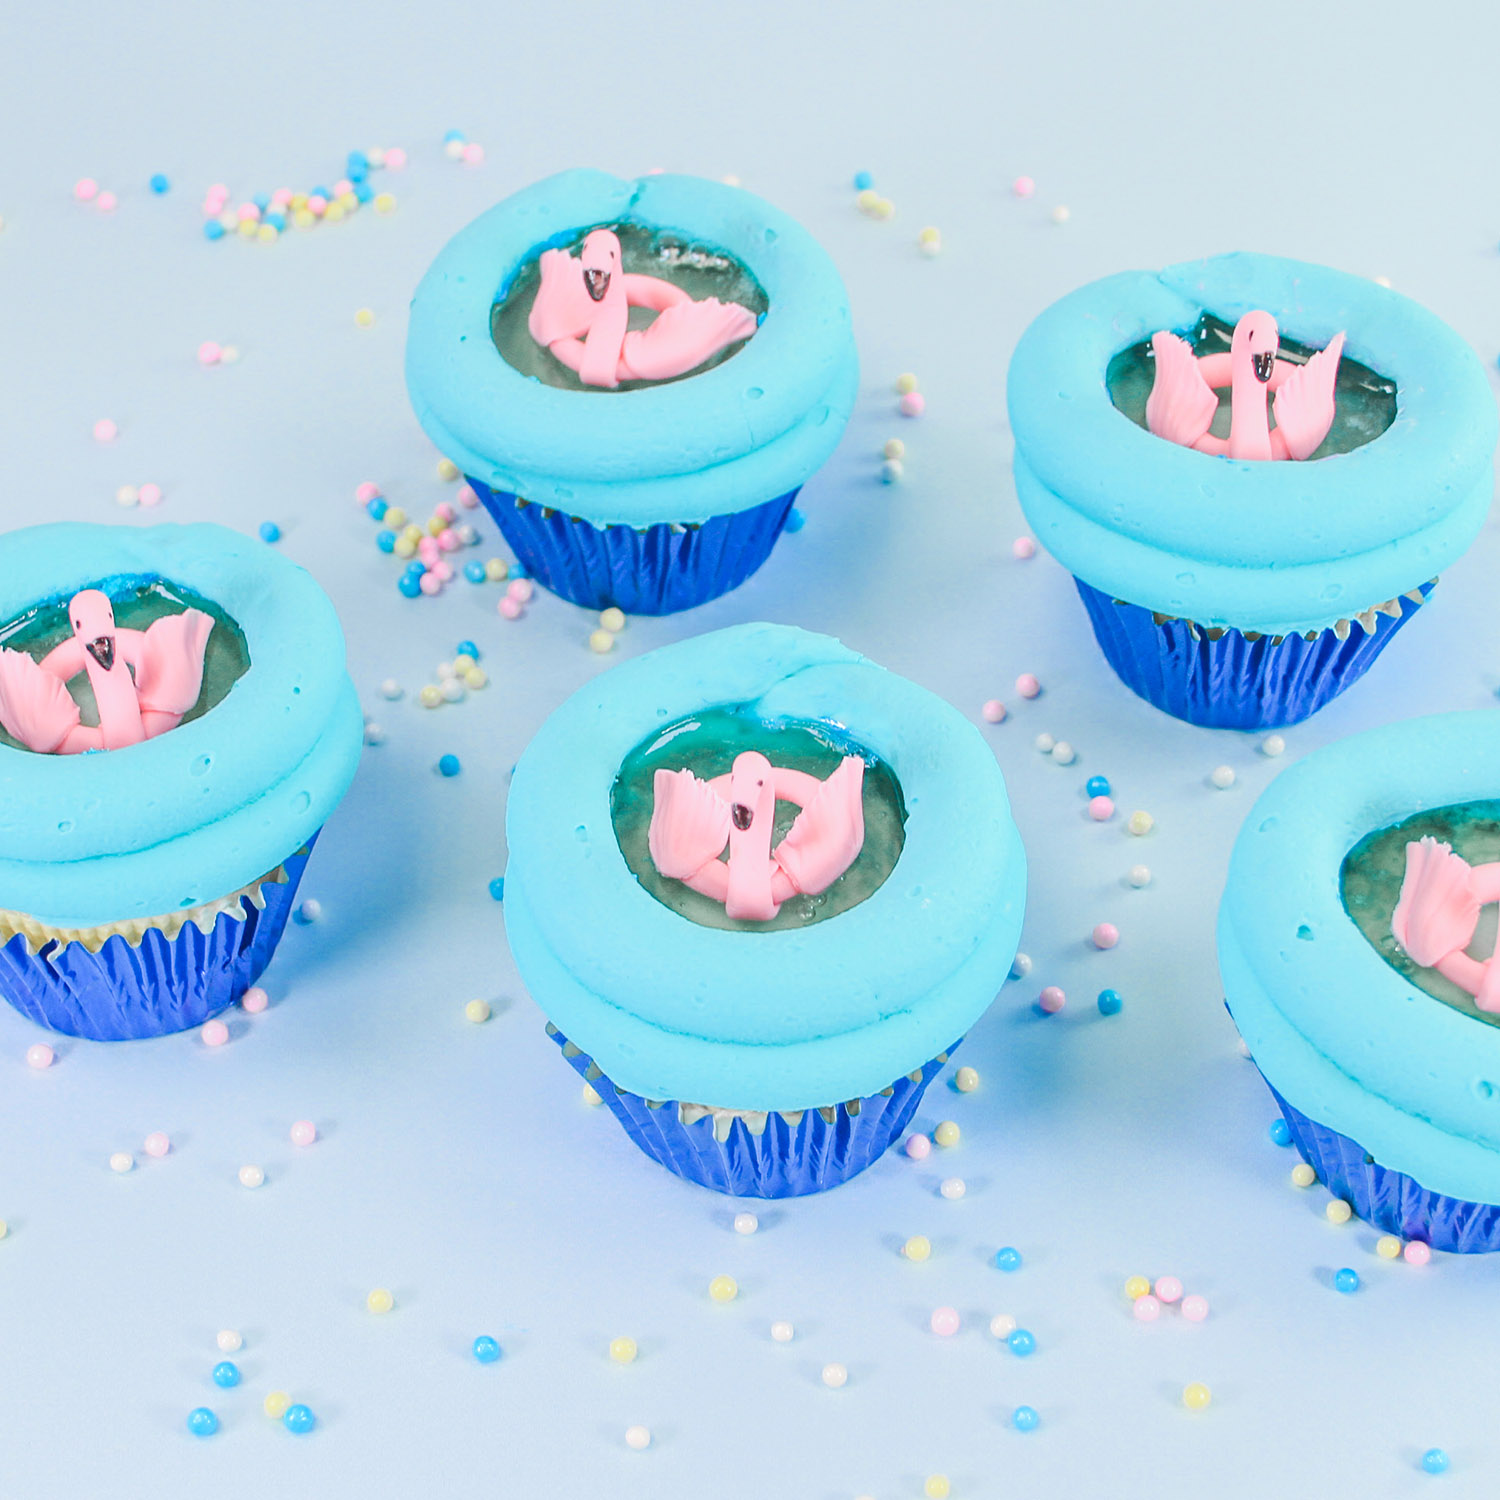 Blue buttercream piped on a cupcake to resemble a round pool. Filled with blue gelatin for water and topped with a fondant made pink flamingo floaty